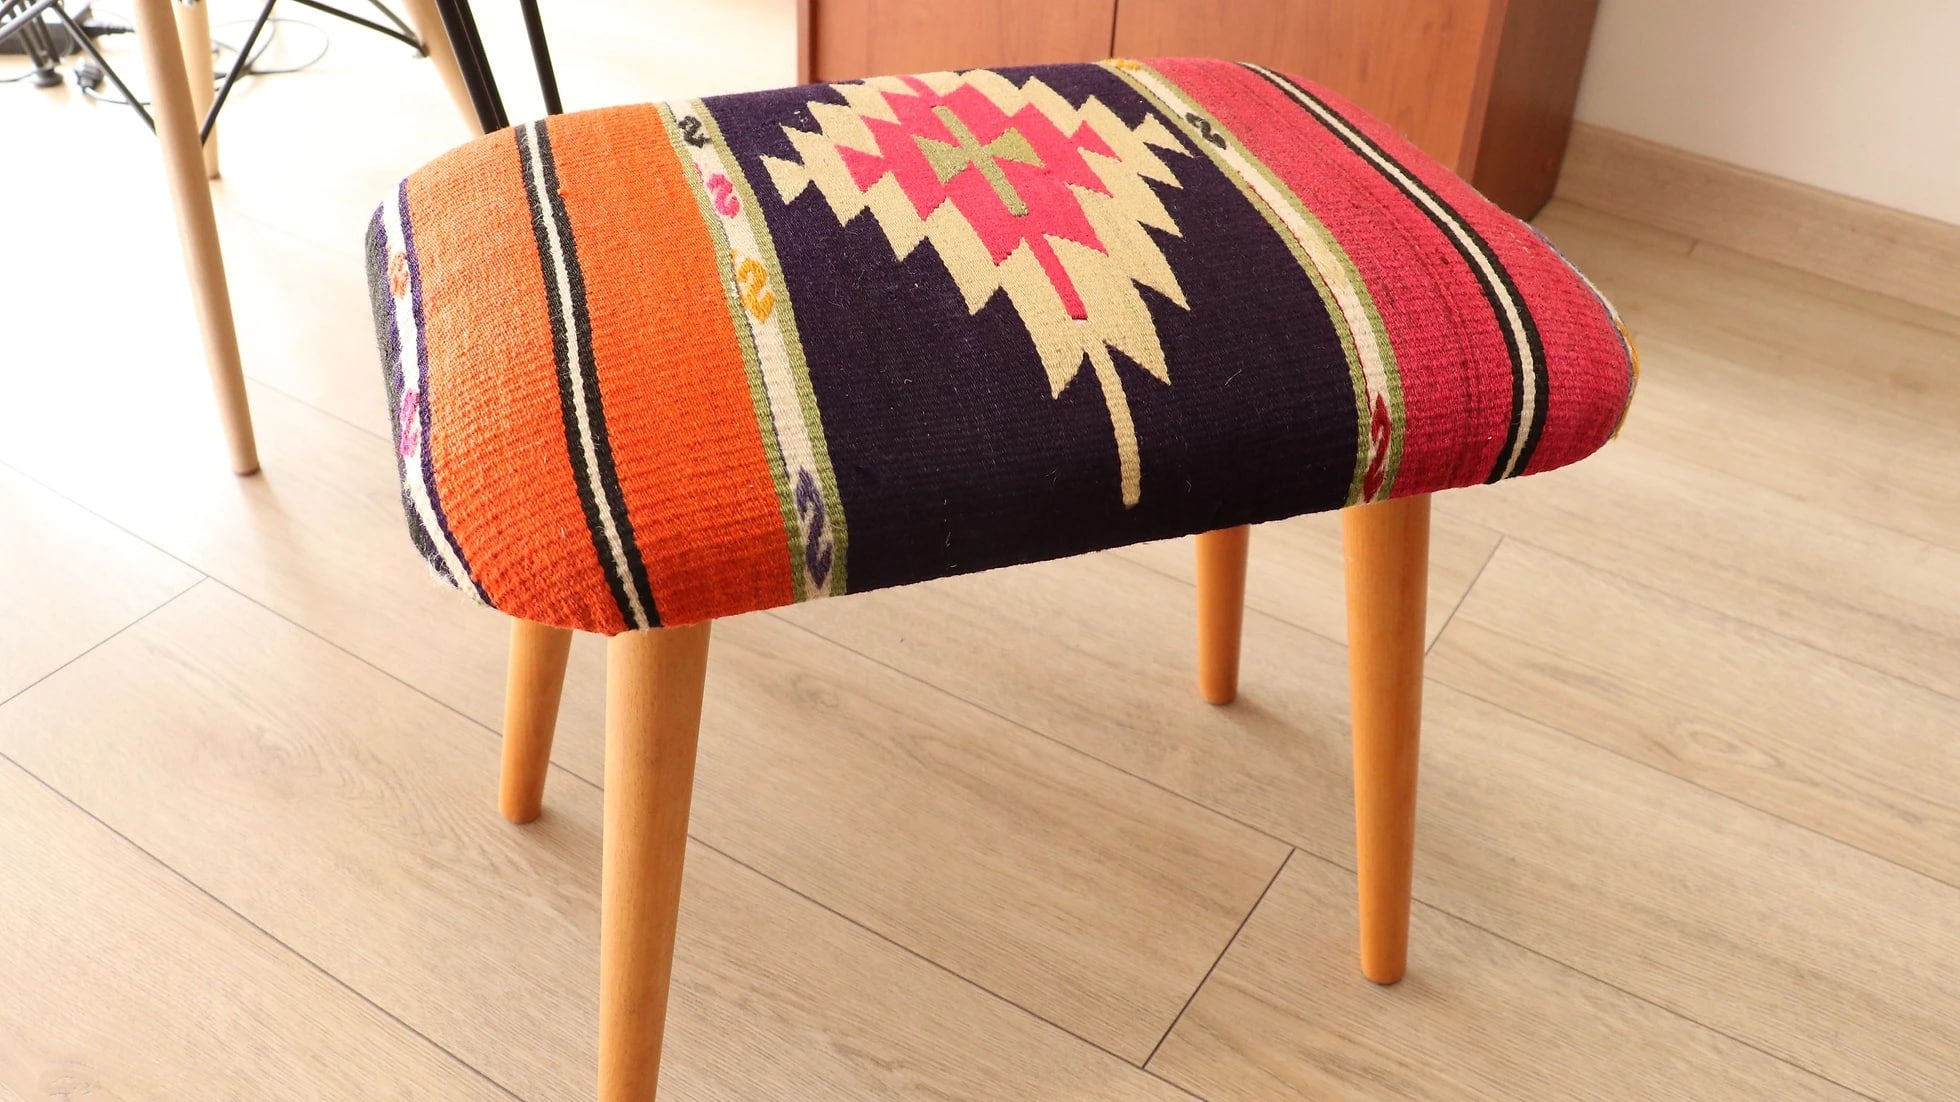 upcycled kilim furniture with tribal motifs and vivid colors